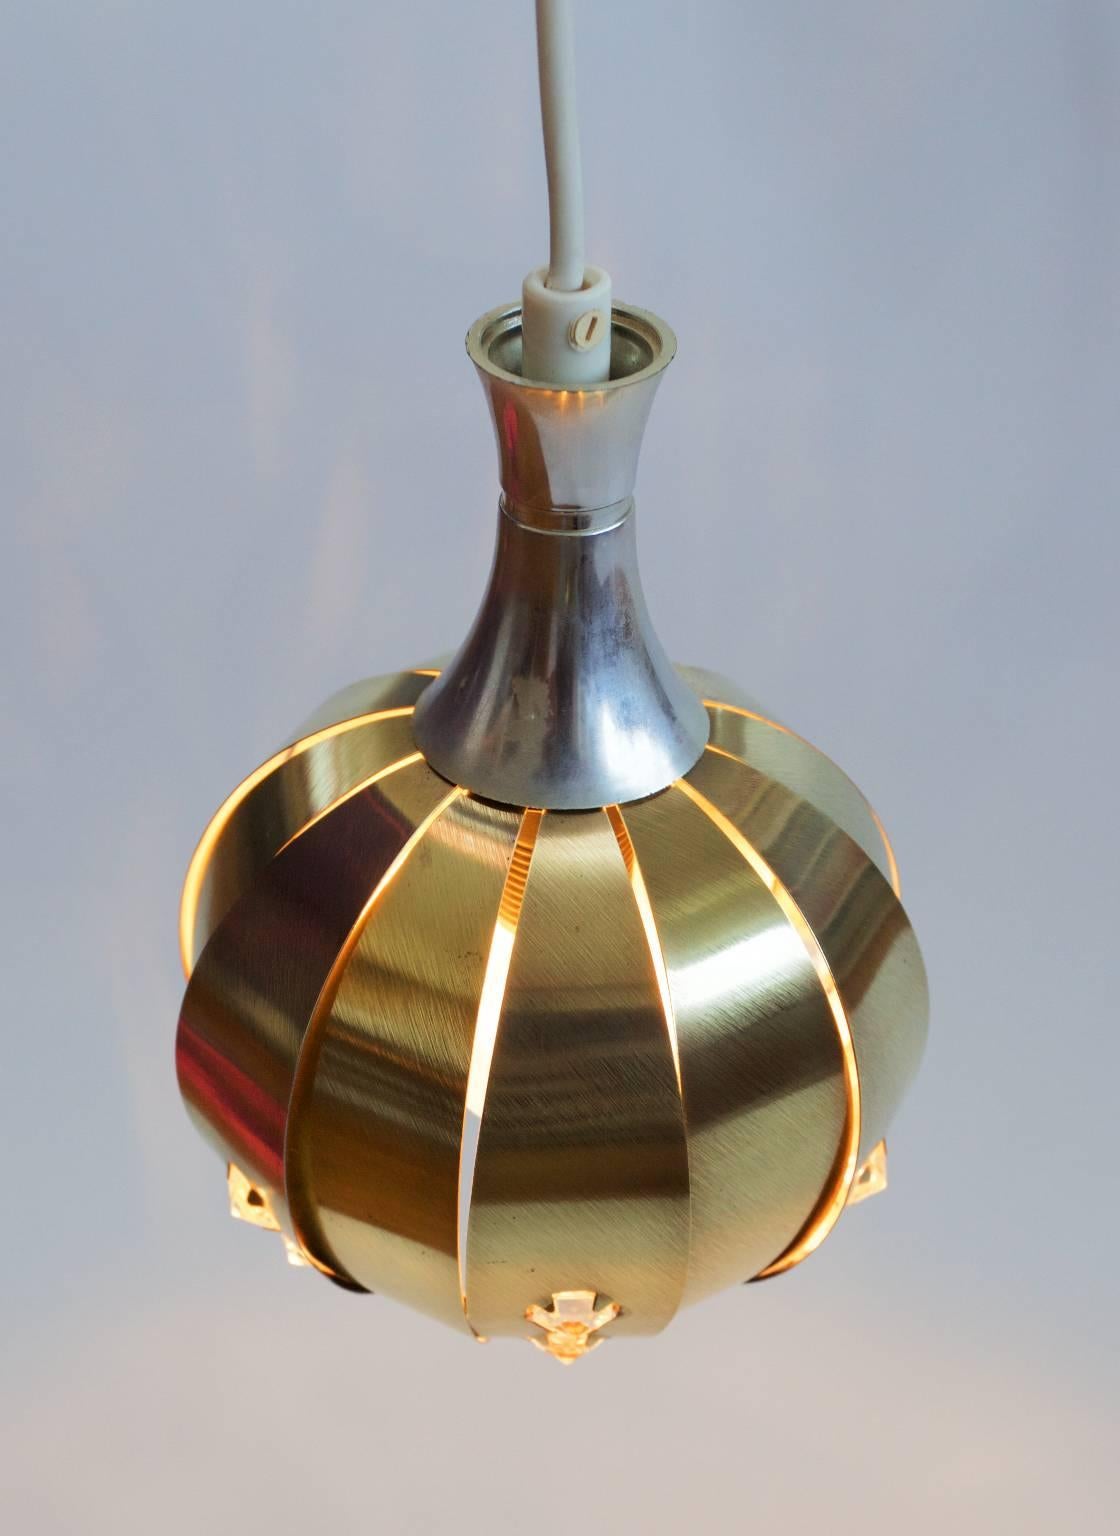 Scandinavian Small Brass Pendant with Prisms by Werner Schou 1970s, Coronell Elektro, Denmark For Sale